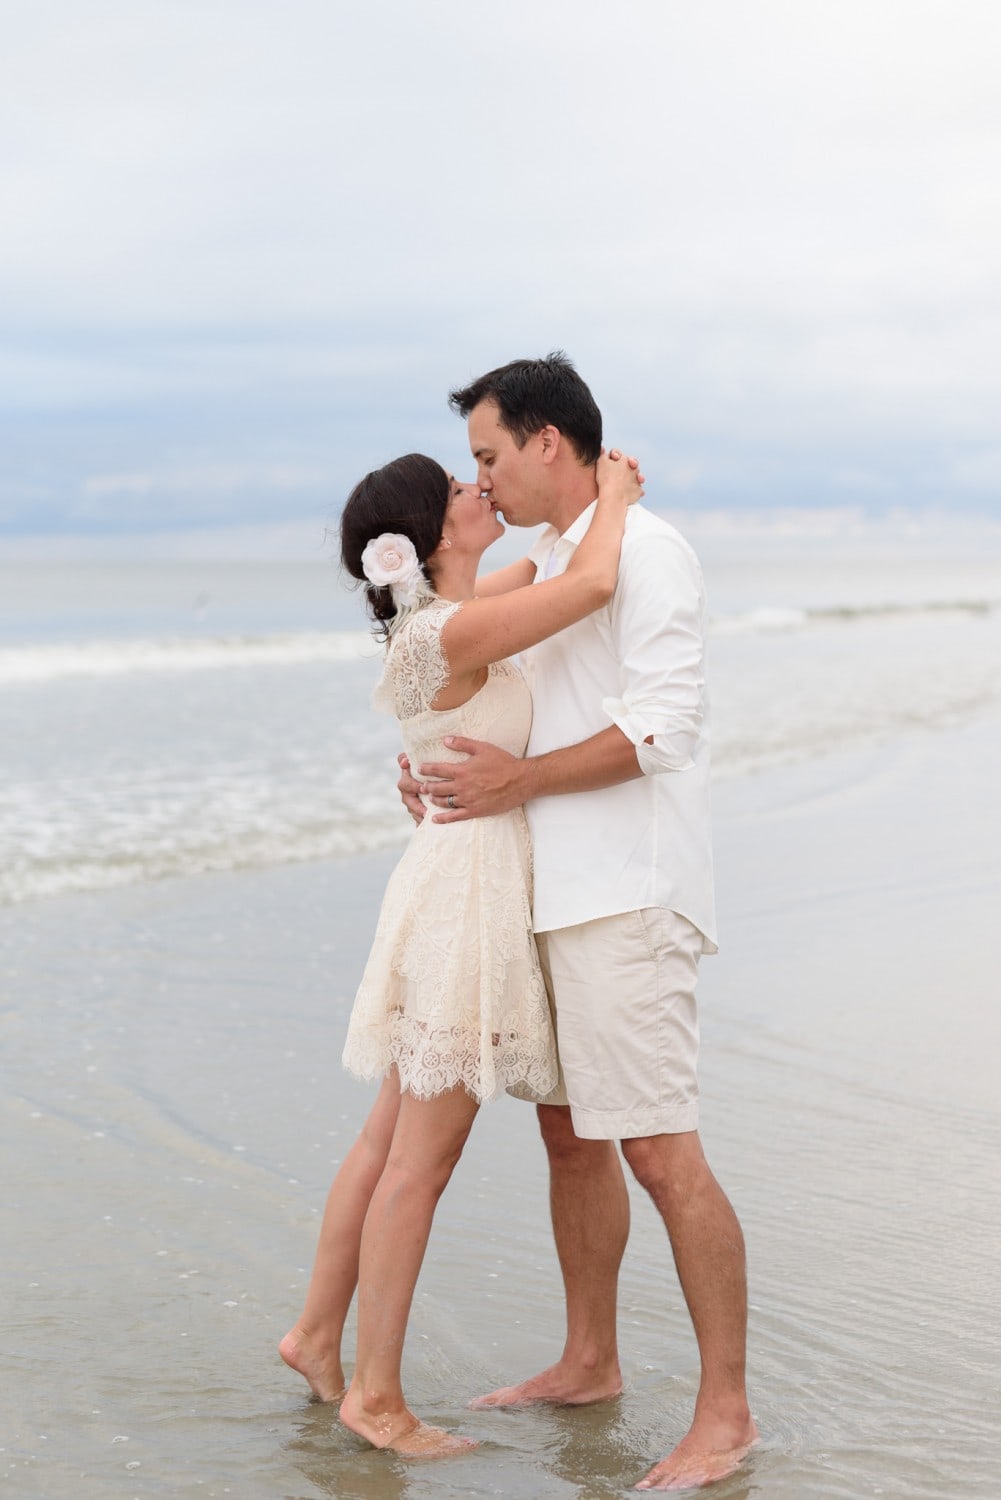 Kiss in front of the ocean - North Beach Plantation